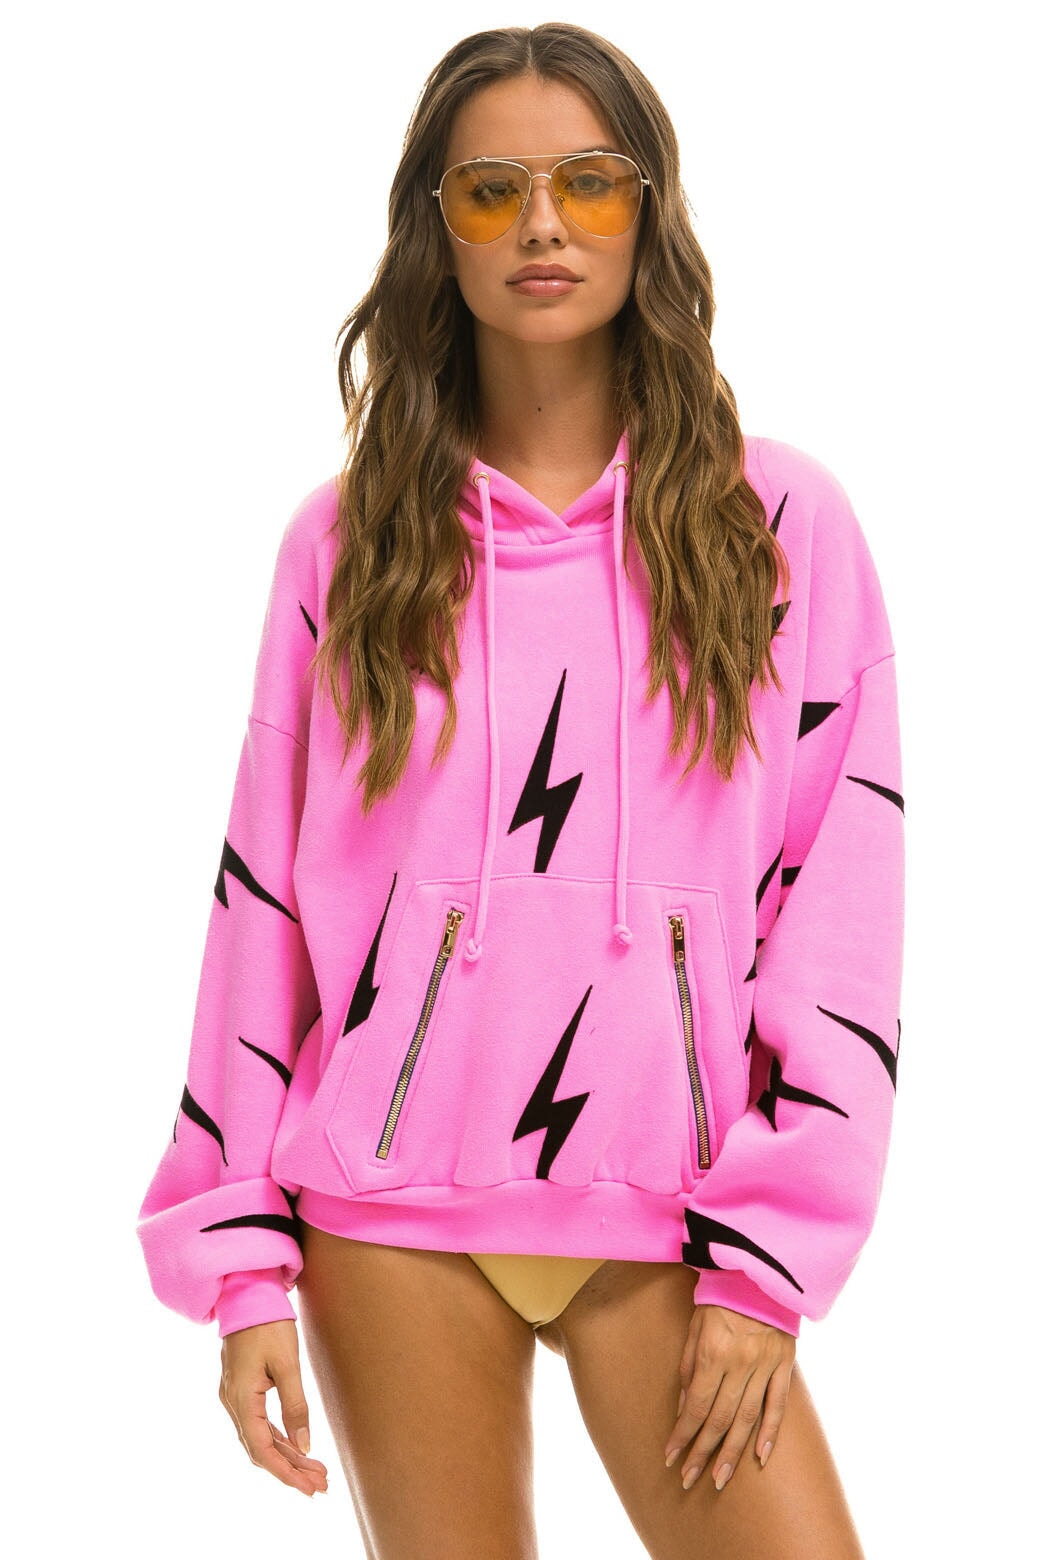 BOLT STITCH REPEAT RELAXED PULLOVER HOODIE WITH POCKET ZIPPERS - NEON PINK // BLACK Hoodie Aviator Nation 